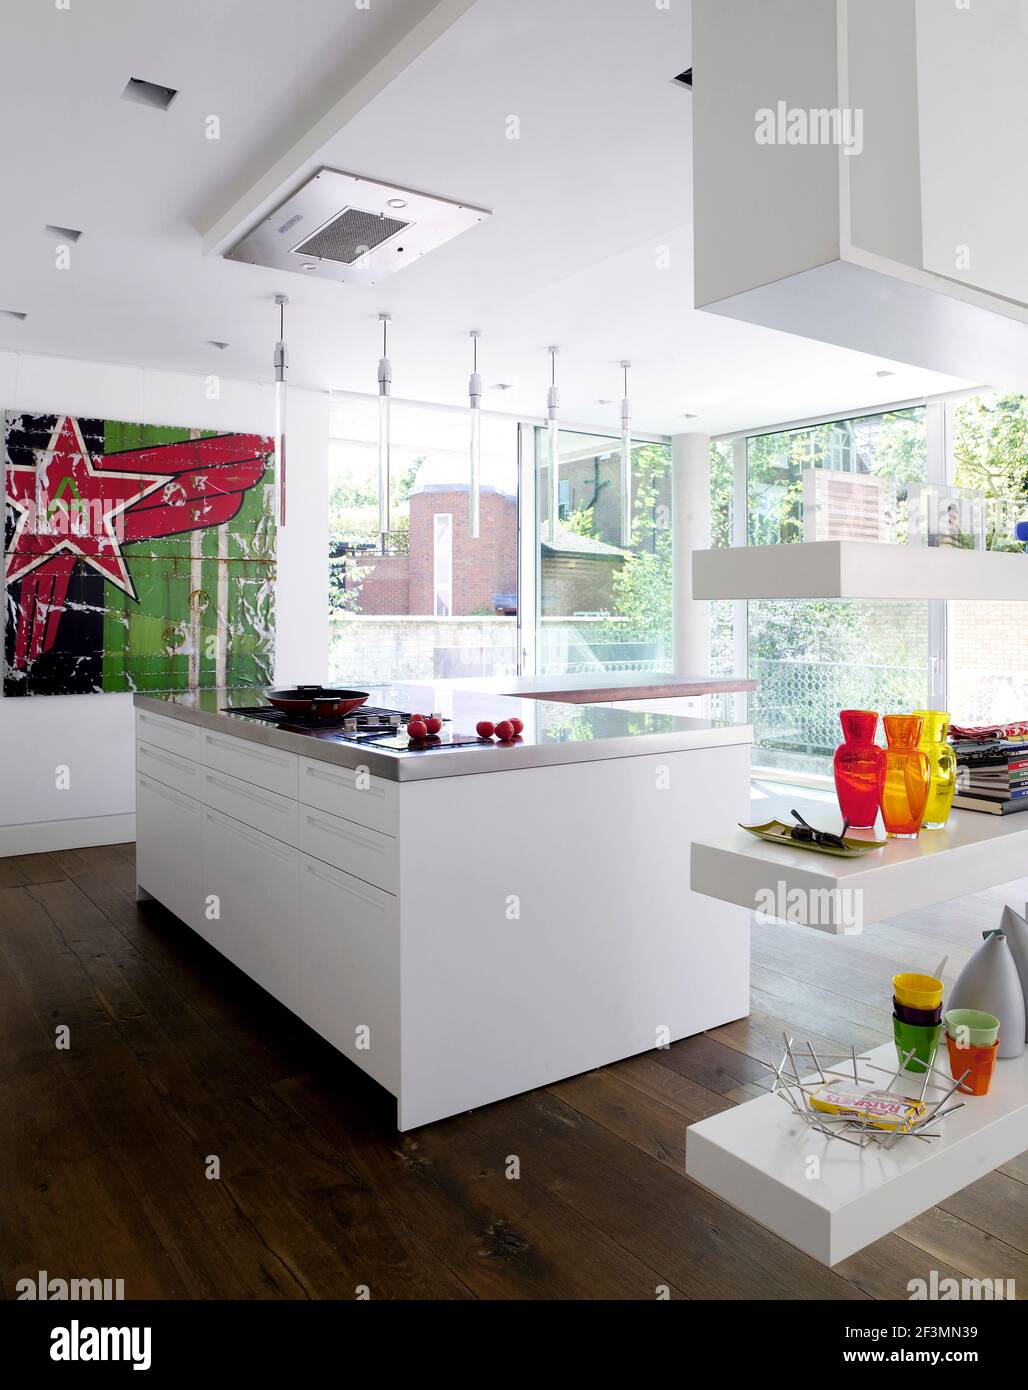 Modern kitchen with central island unit in UK home Stock Photo